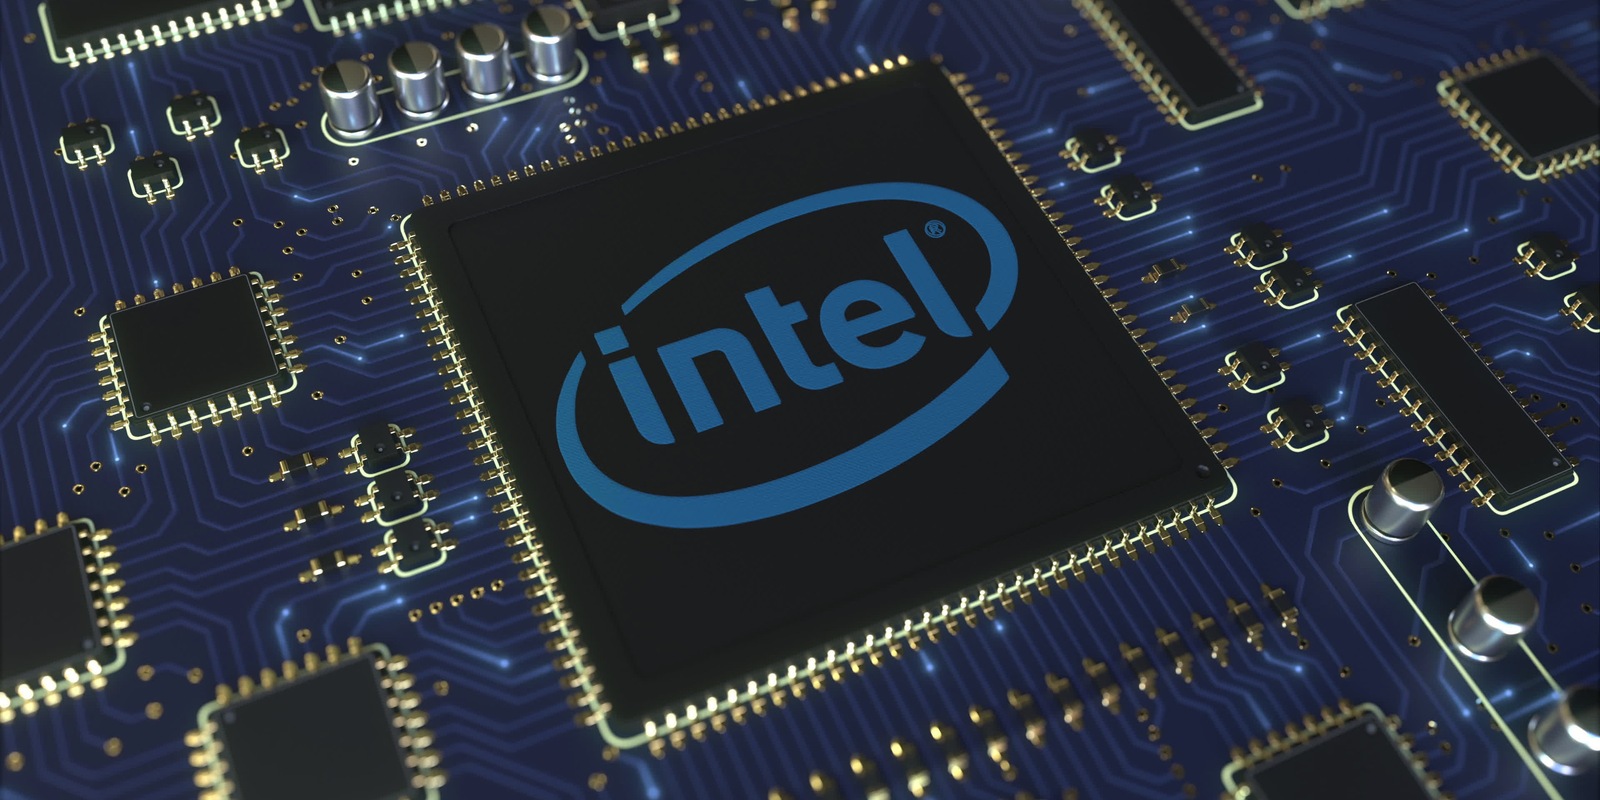 Intel is strengthening its commitment to the automotive industry by introducing a new artificial intelligence-powered chip for automobiles